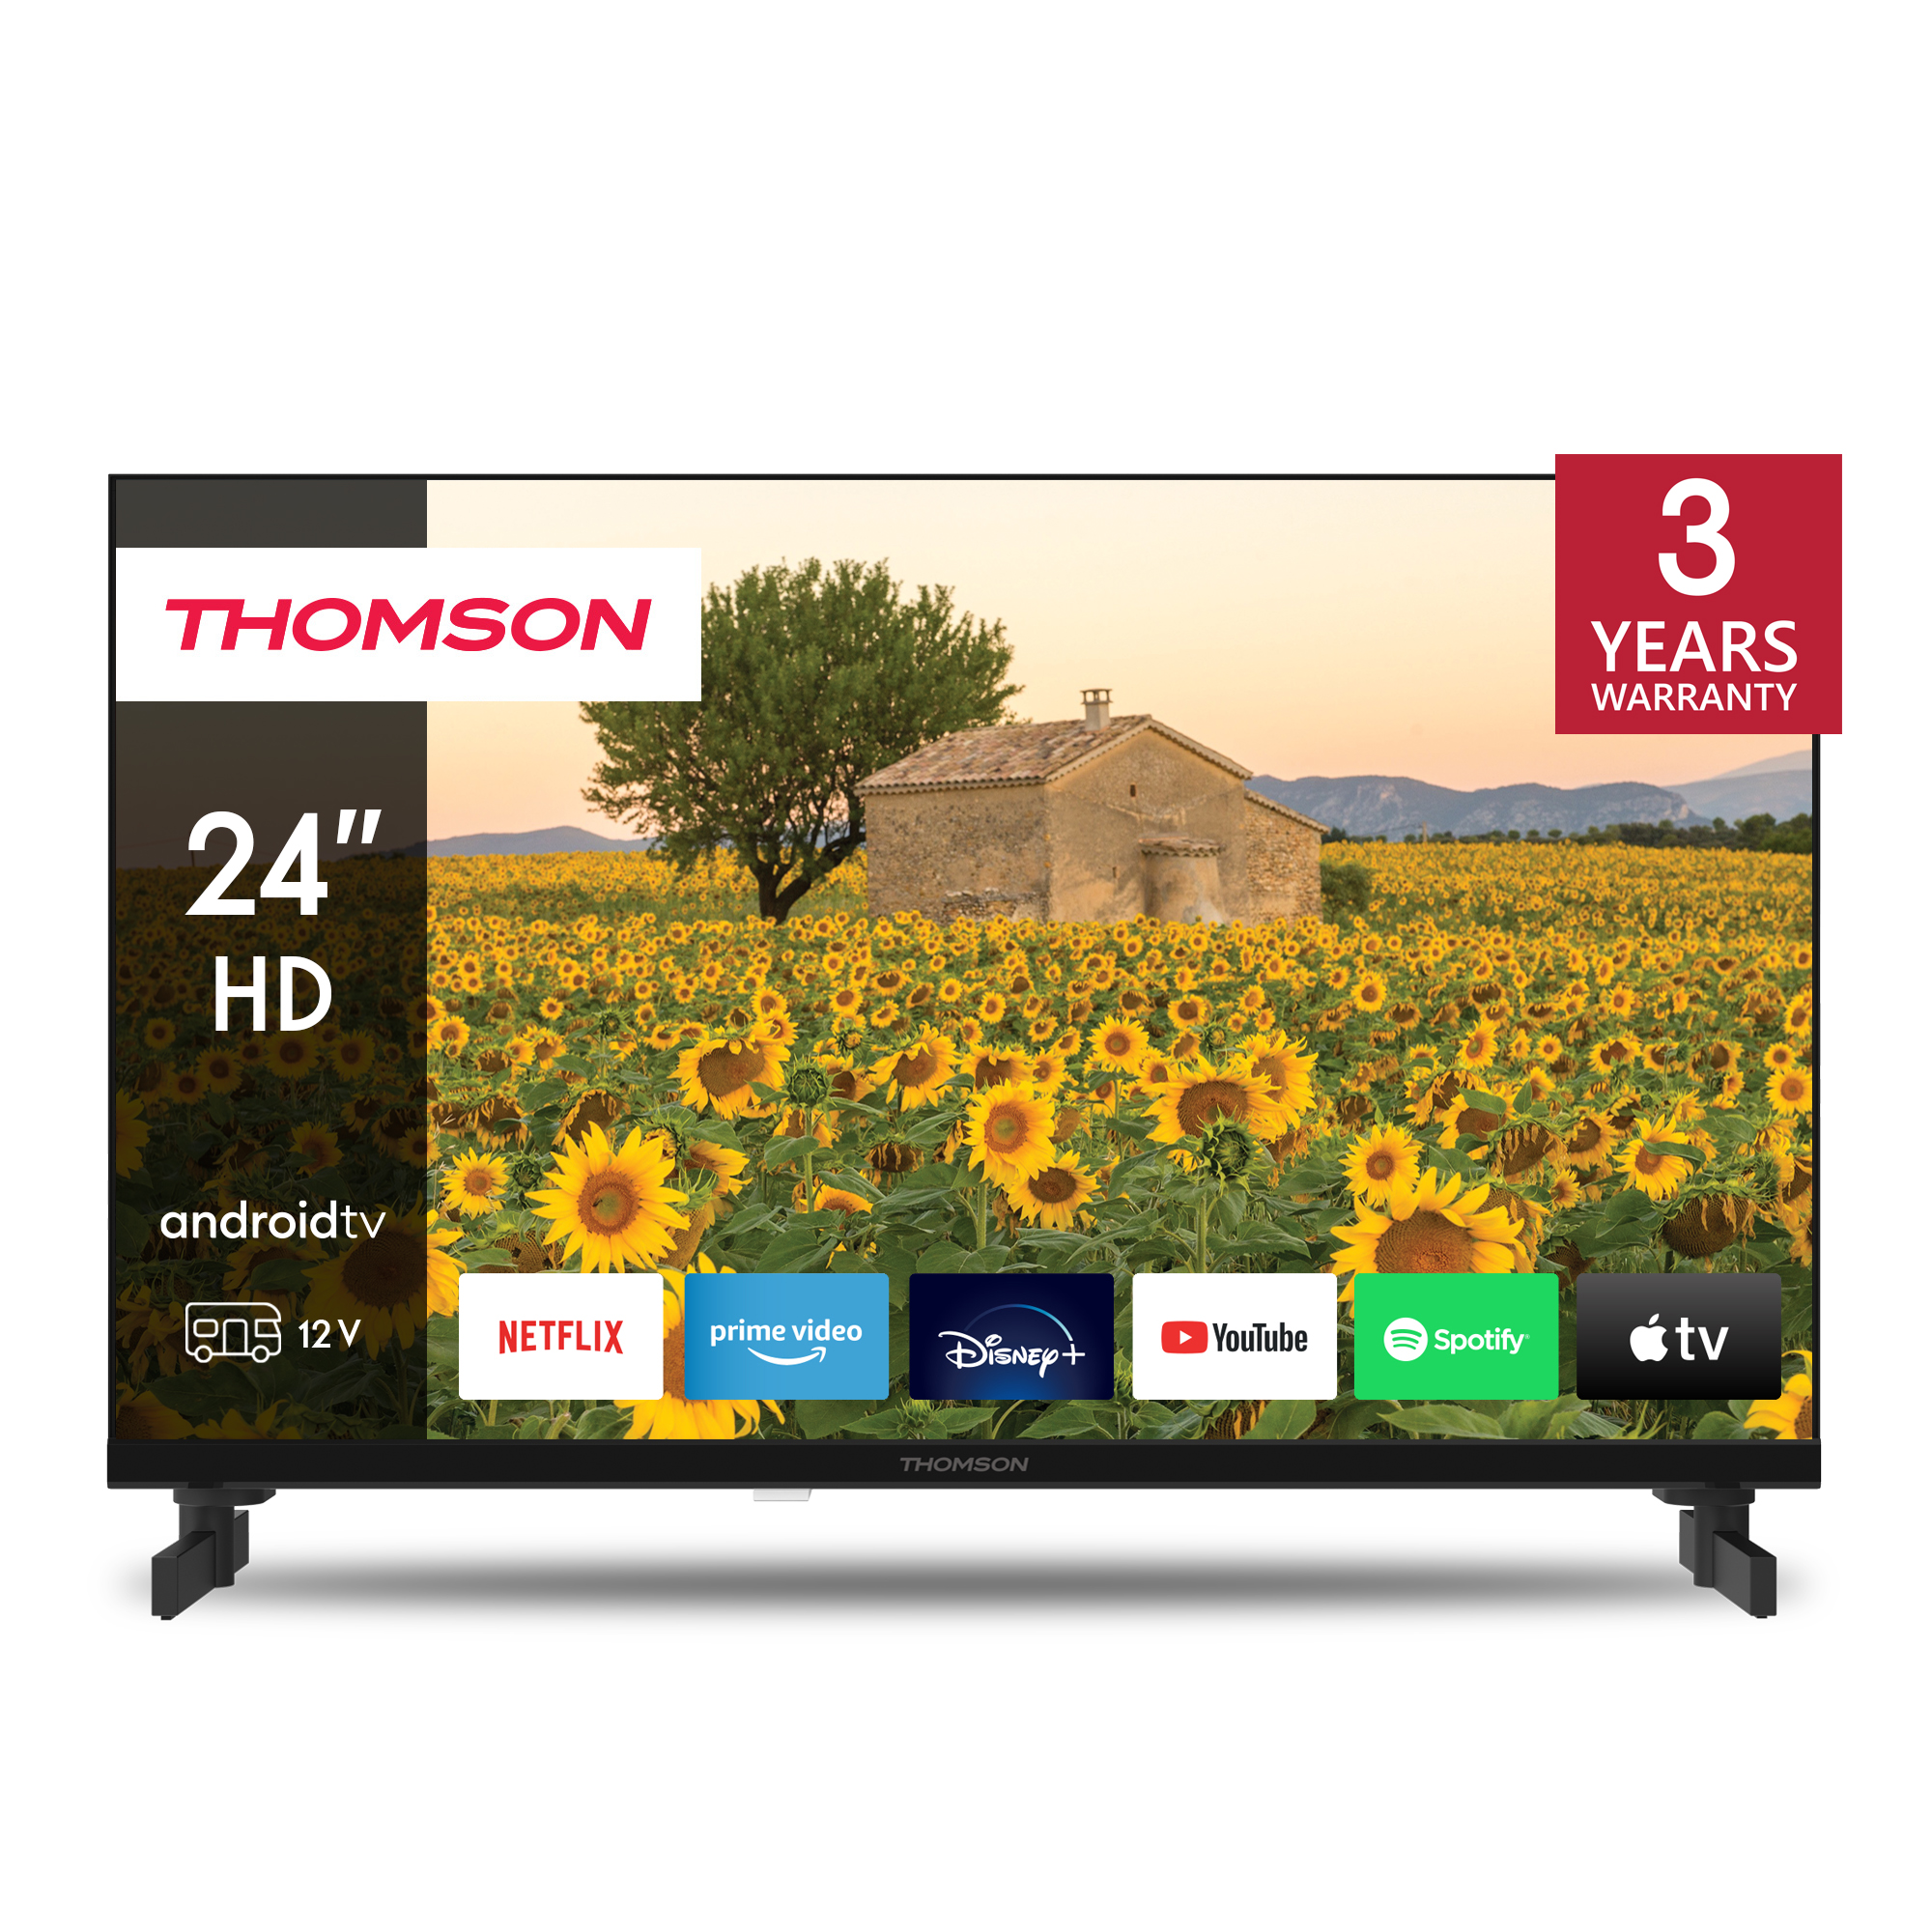 Thomson Android TV 24'' HD 12V